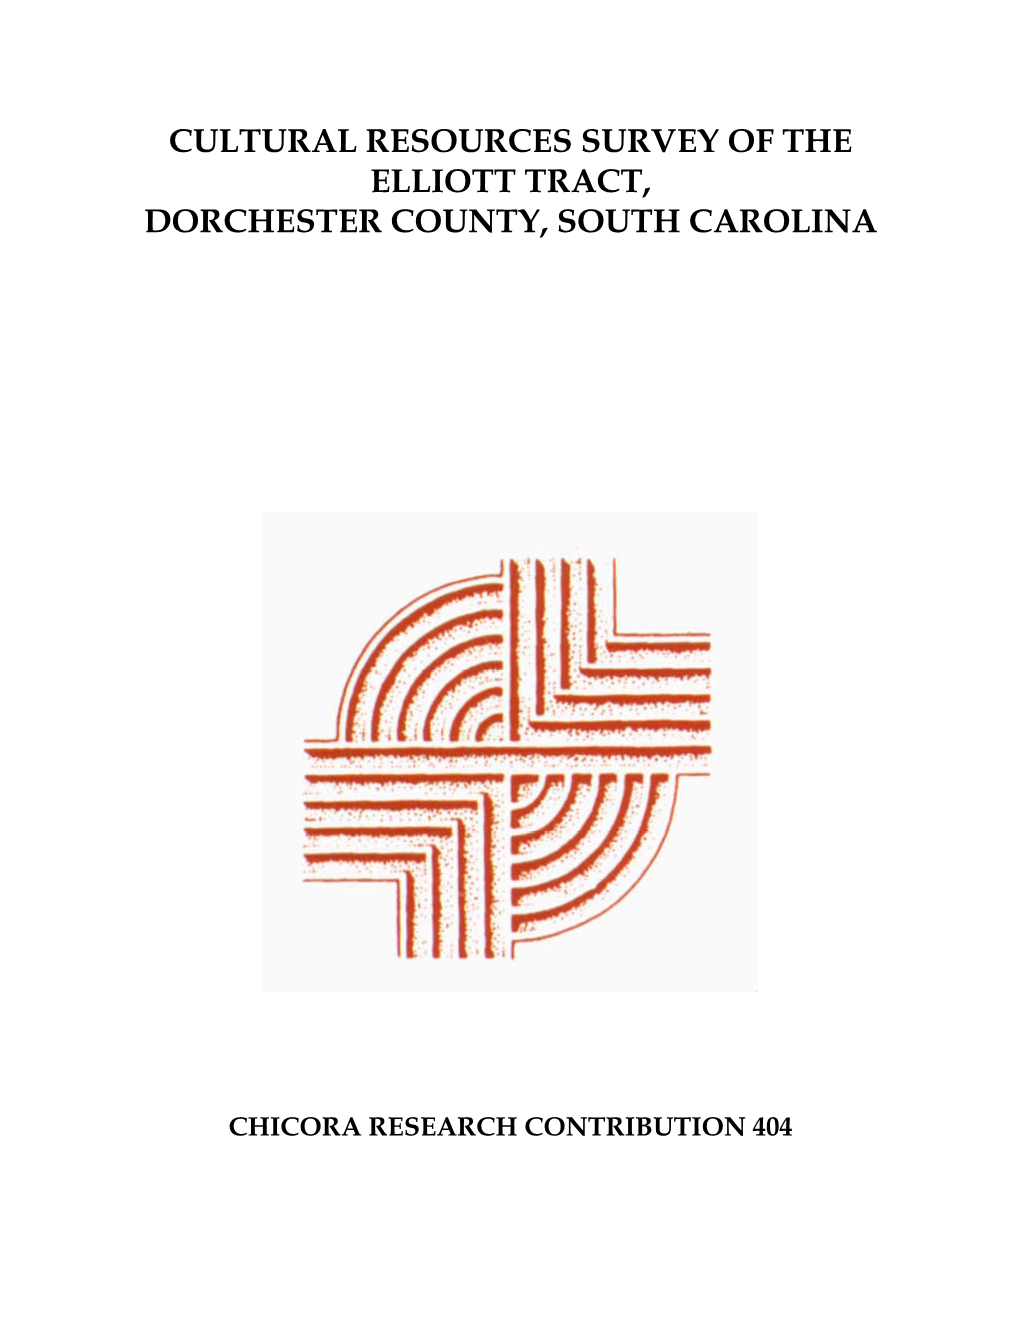 Cultural Resources Survey of the Elliott Tract, Dorchester County, South Carolina